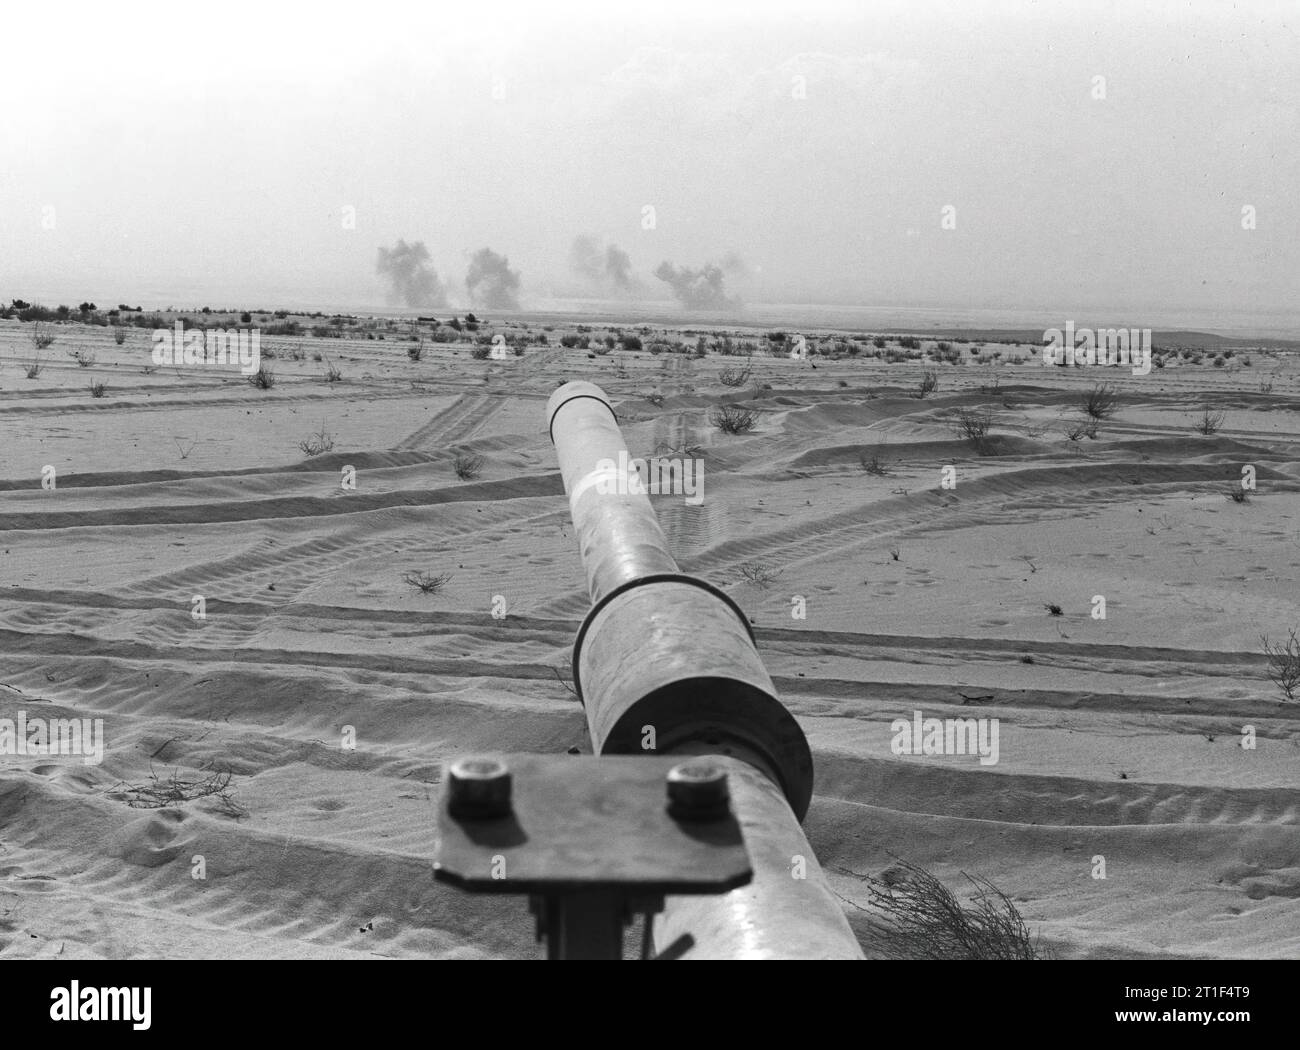 YOM KIPPUR WAR. ISRAELI ARMOUR BOMBARDING THE     BRIDGES IN TSHE SOUTHERN SECTOR OF THE SUEZ CANAL. Stock Photo